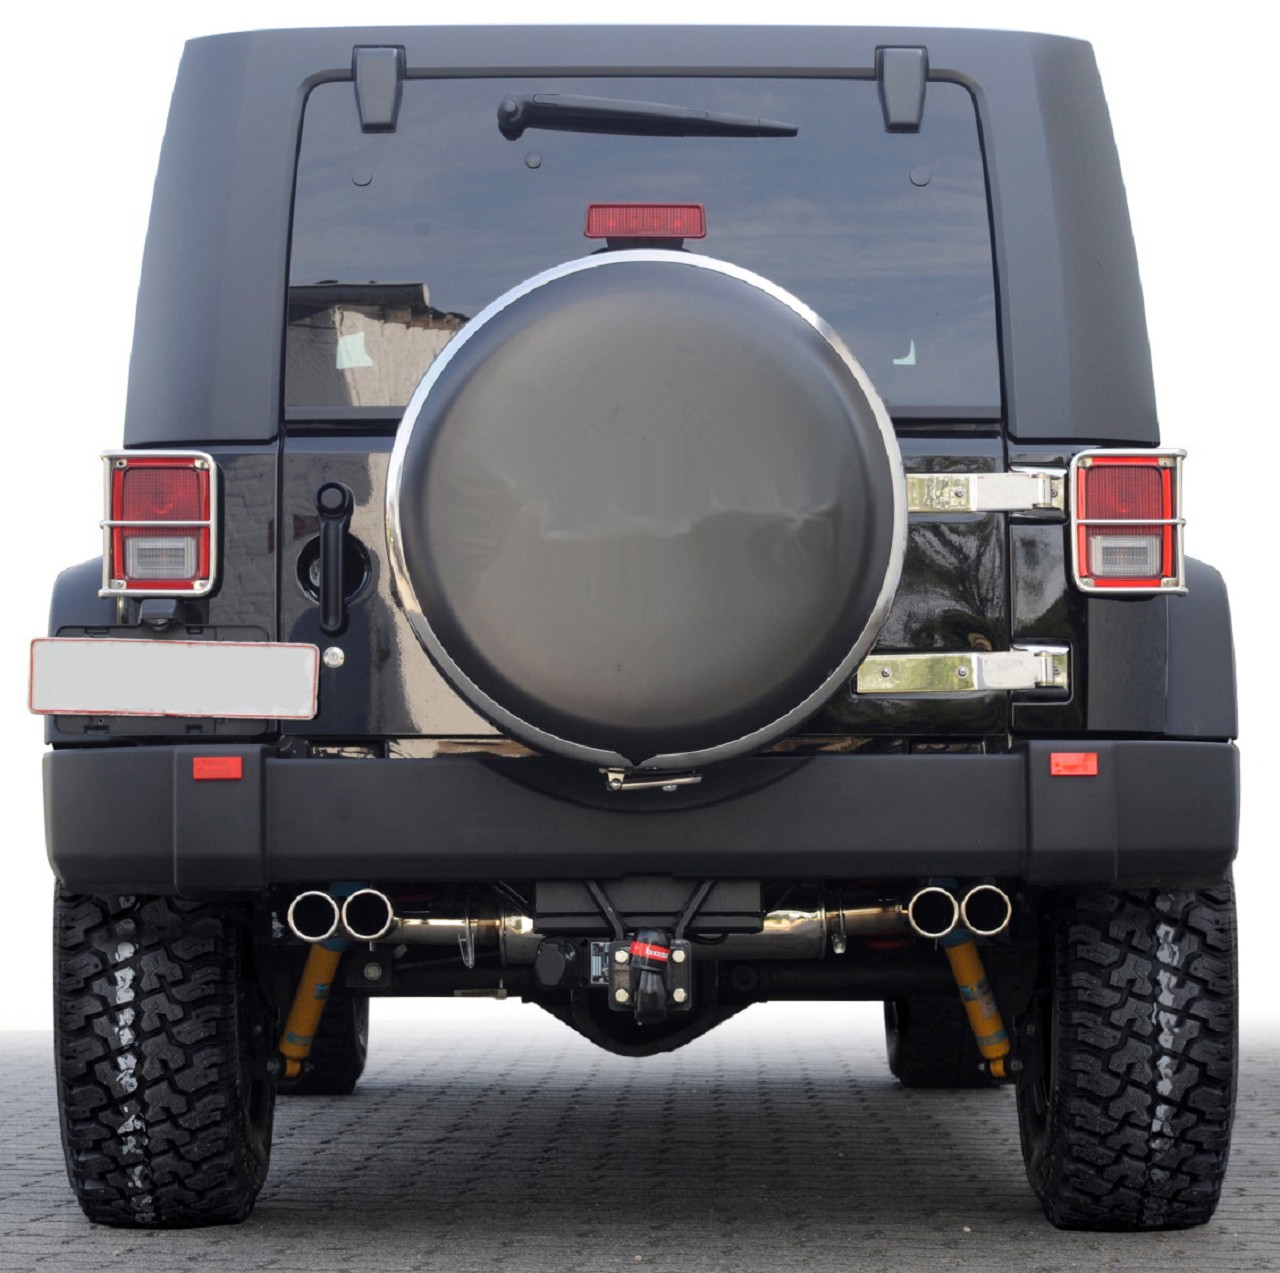 Tire cover stainless steel suitable for tire size 265/70R16 and 265/65R17